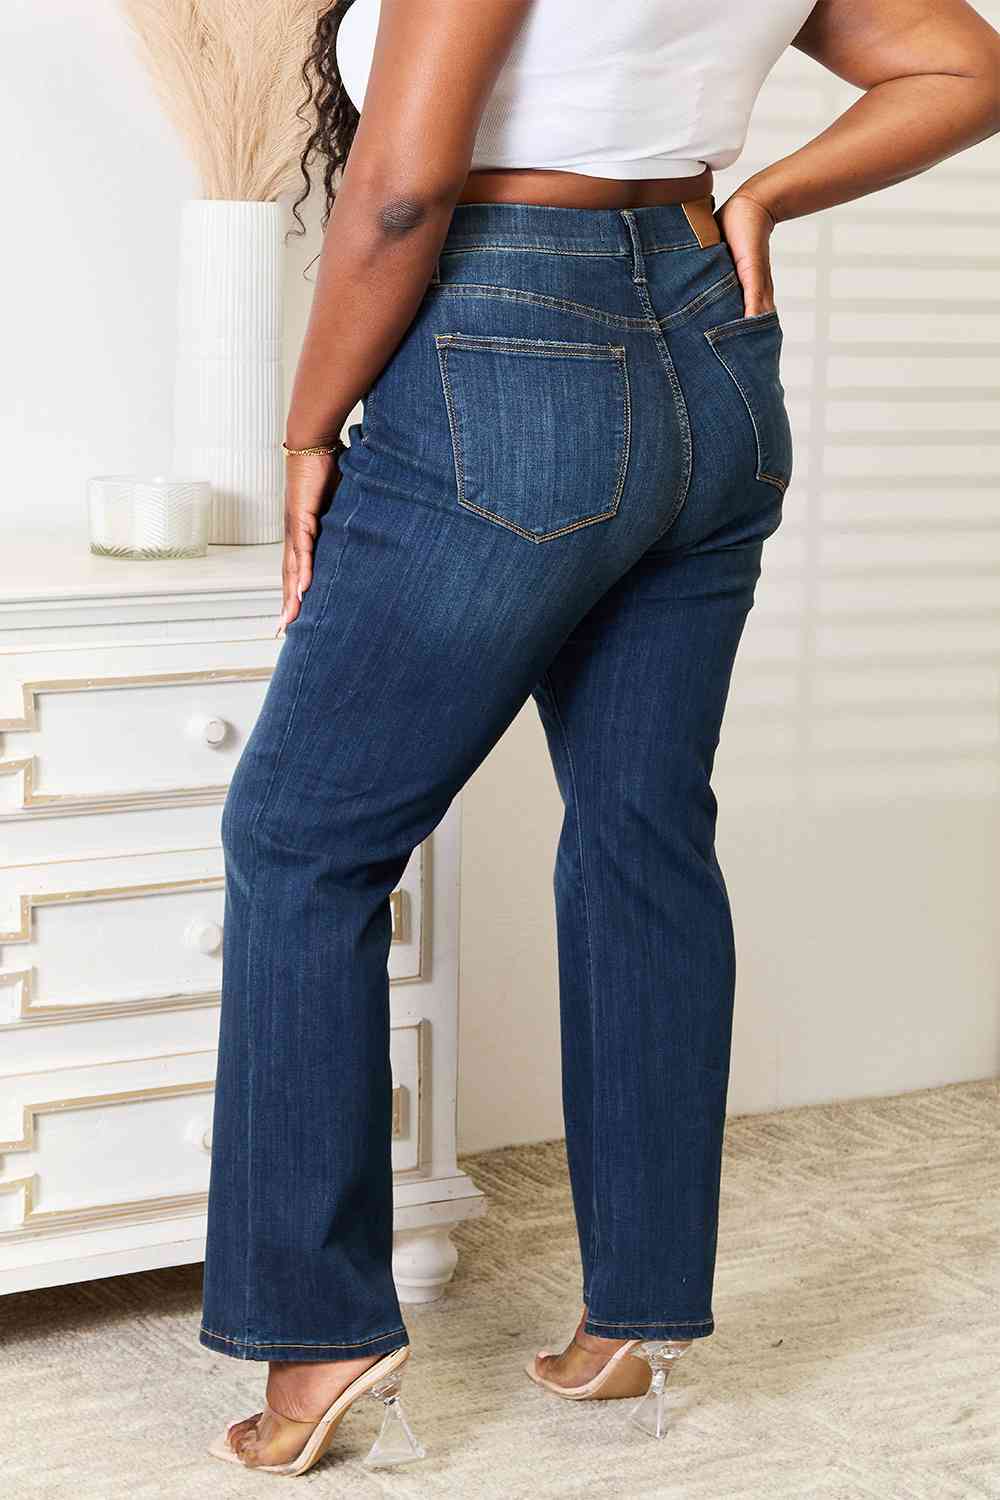 Back View, Plus Size, Judy Blue High Waist Vintage Pull On Slim Bootcut Jeans Style 88589